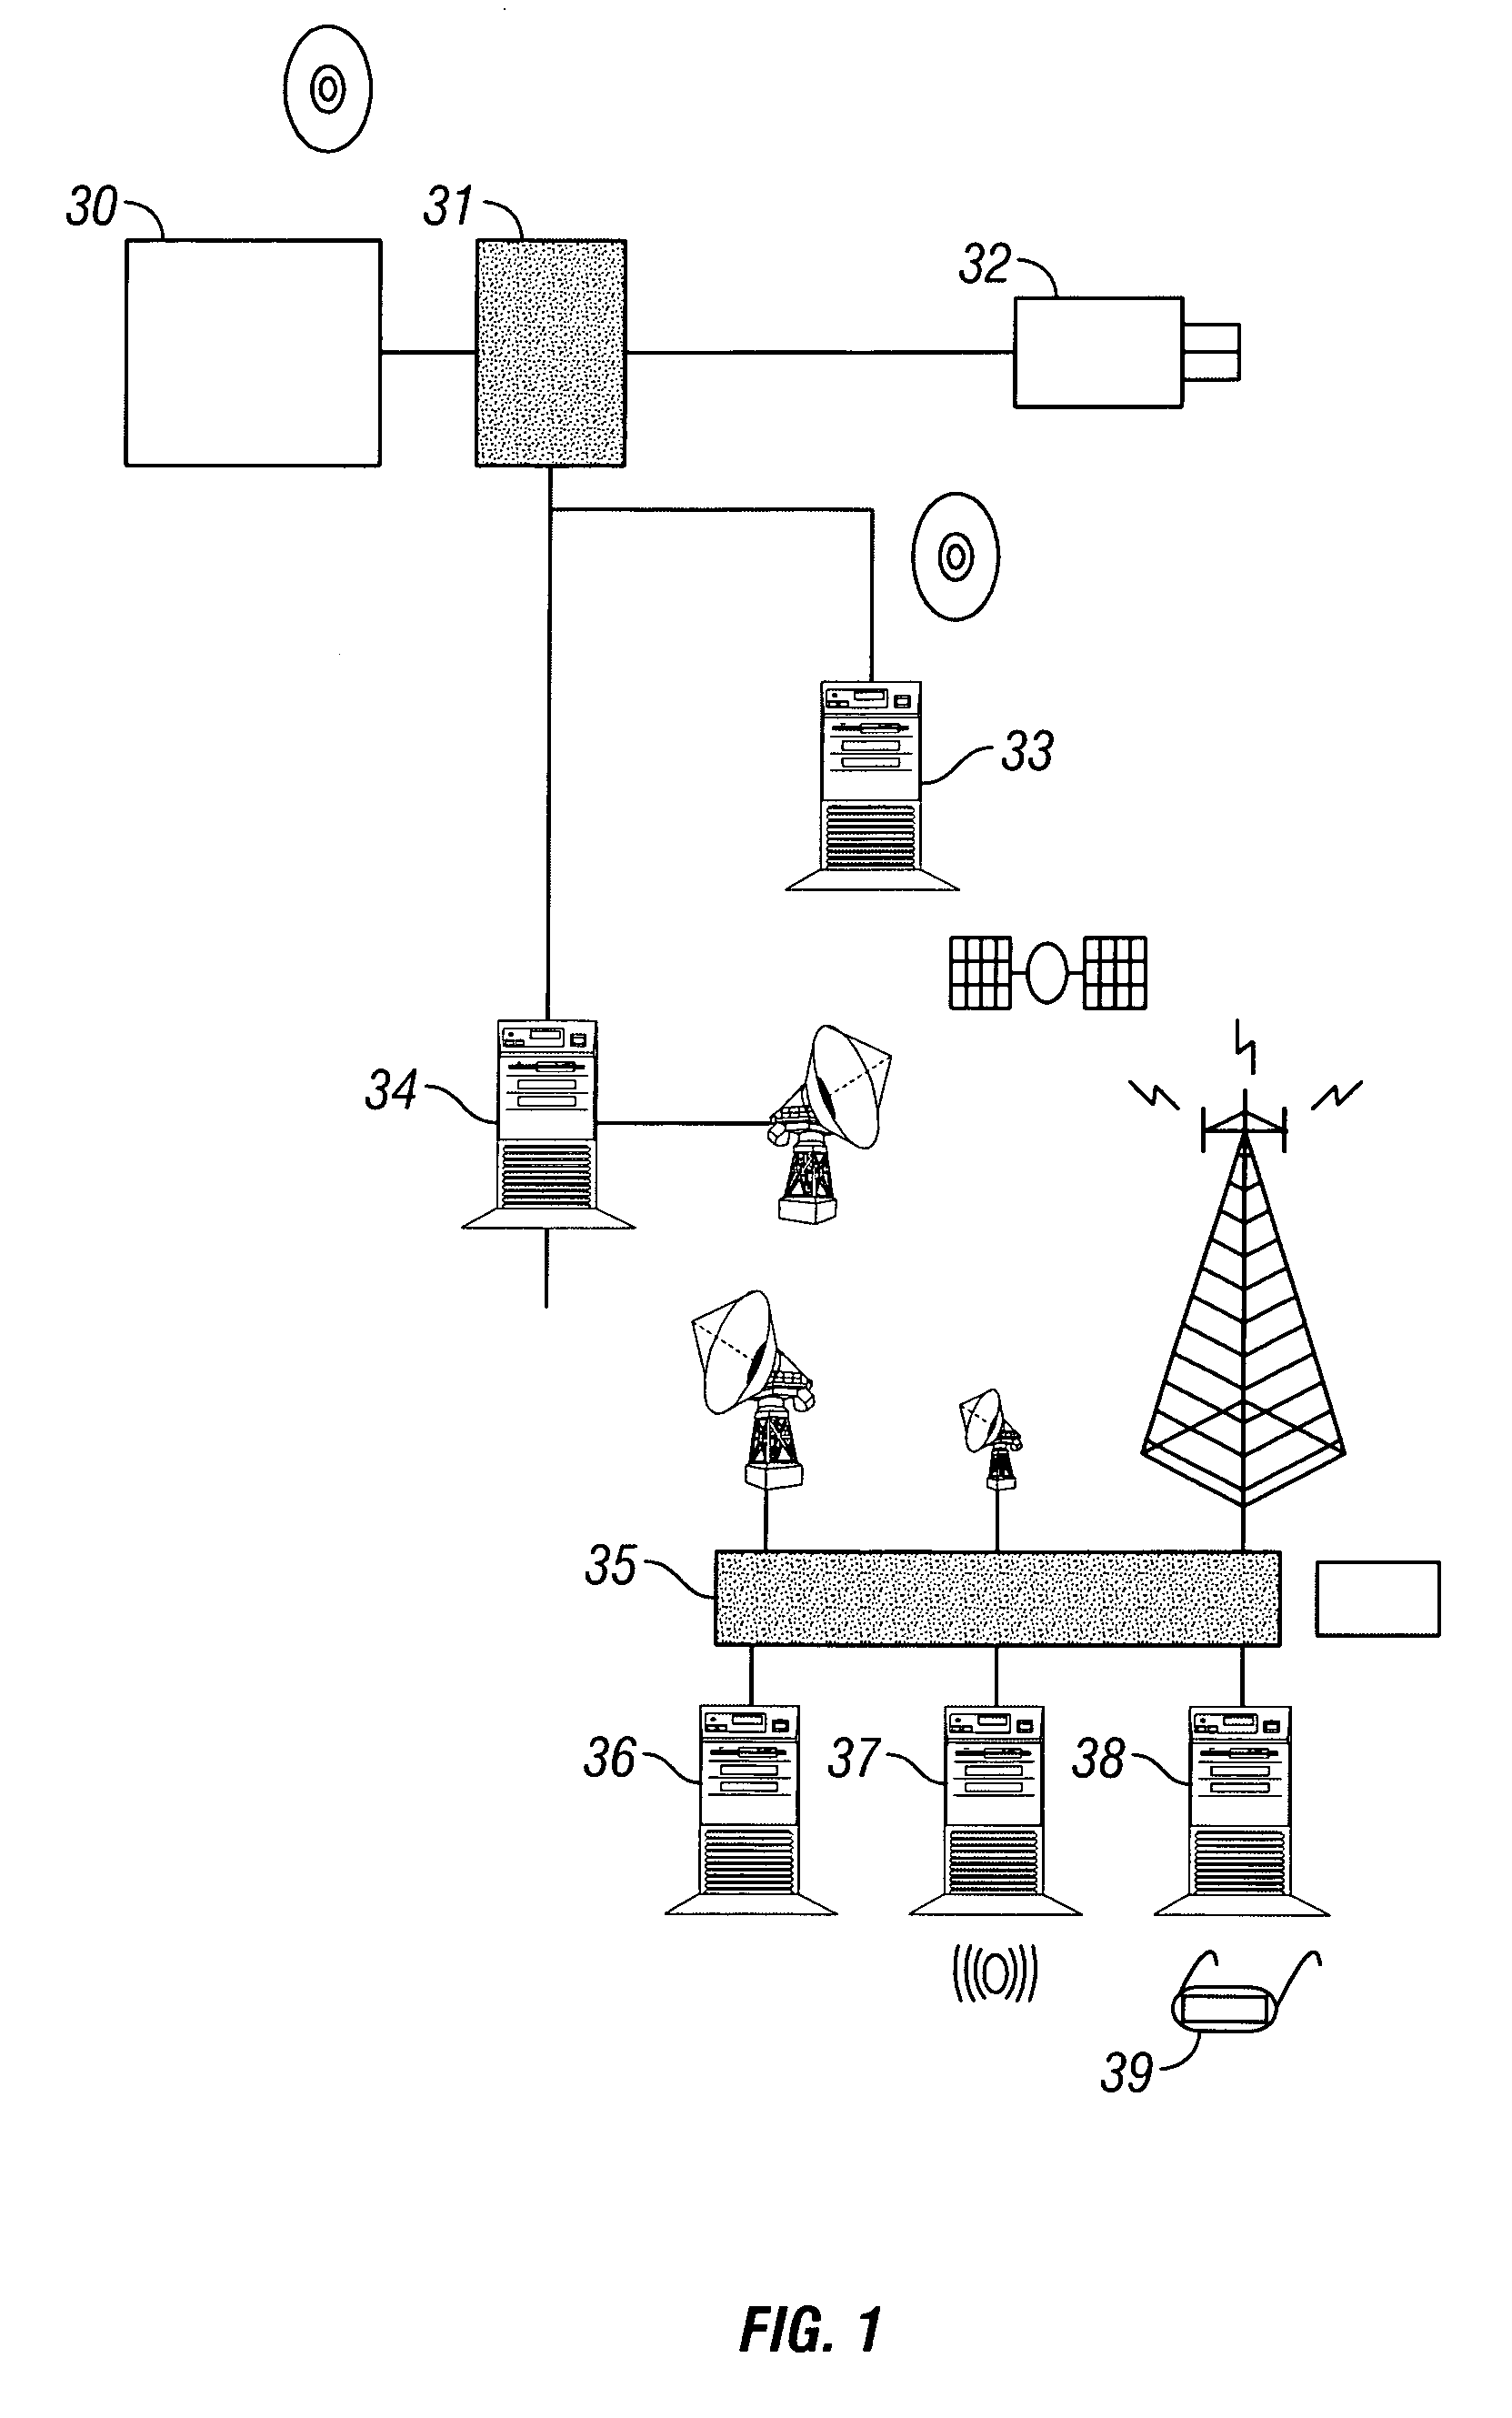 Stereoscopic 3D-video image digital decoding system and method